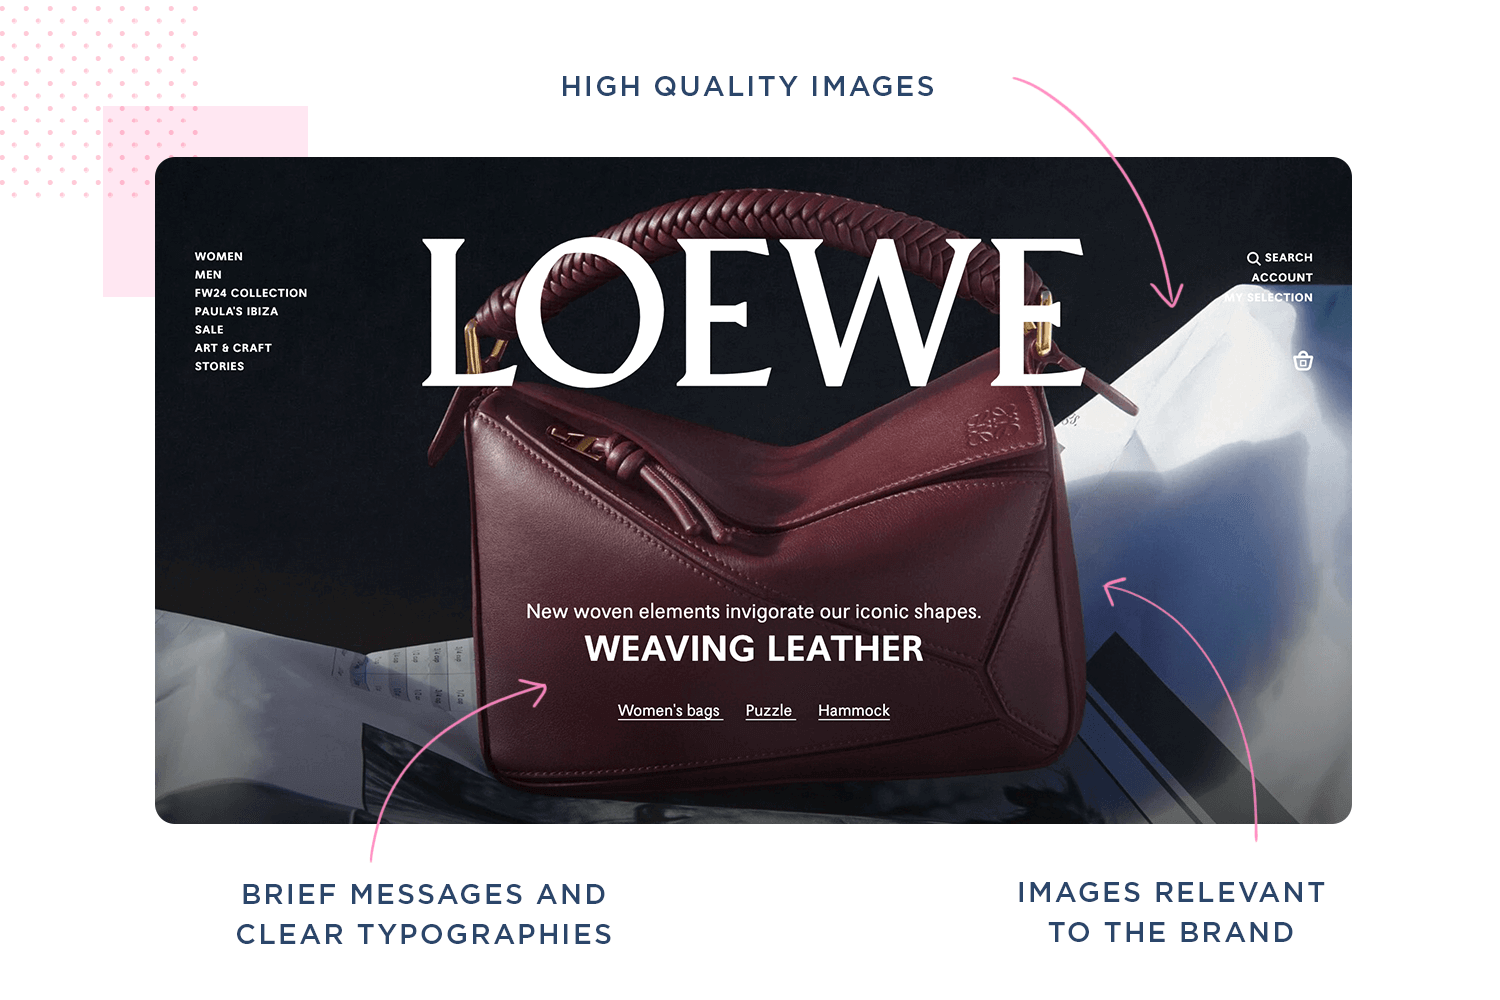 LOEWE weaving leather handbag, high-quality image with clear typography and brand-relevant visuals